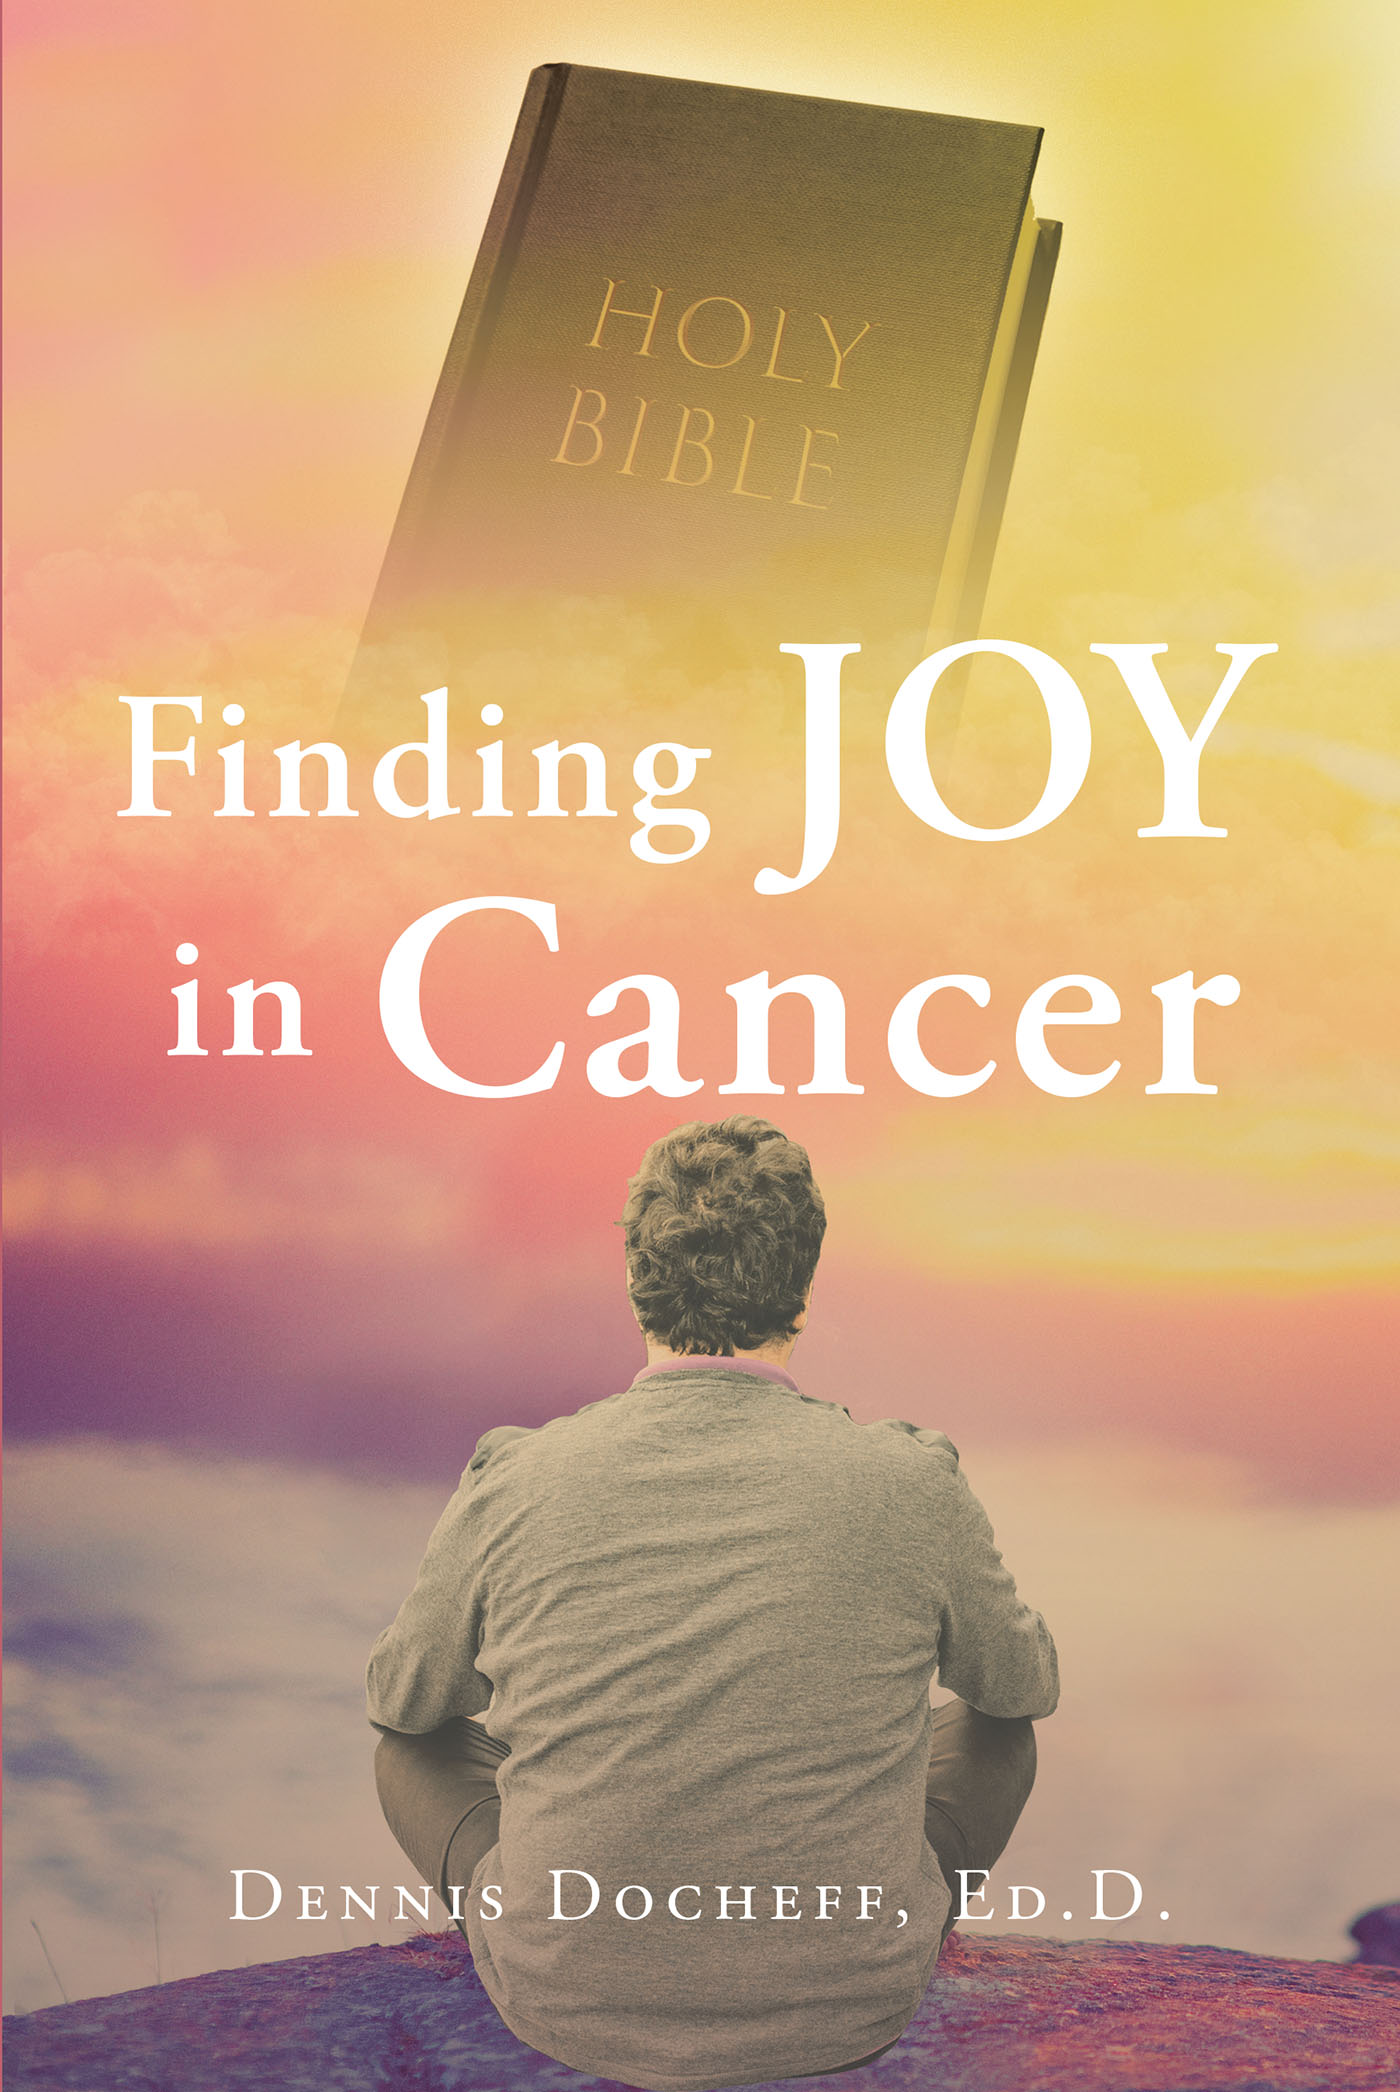 Dennis Docheff, Ed.D.’s Newly Released “Finding JOY in Cancer” is an Inspiring Message of Encouragement to Anyone Facing a Cancer Diagnosis